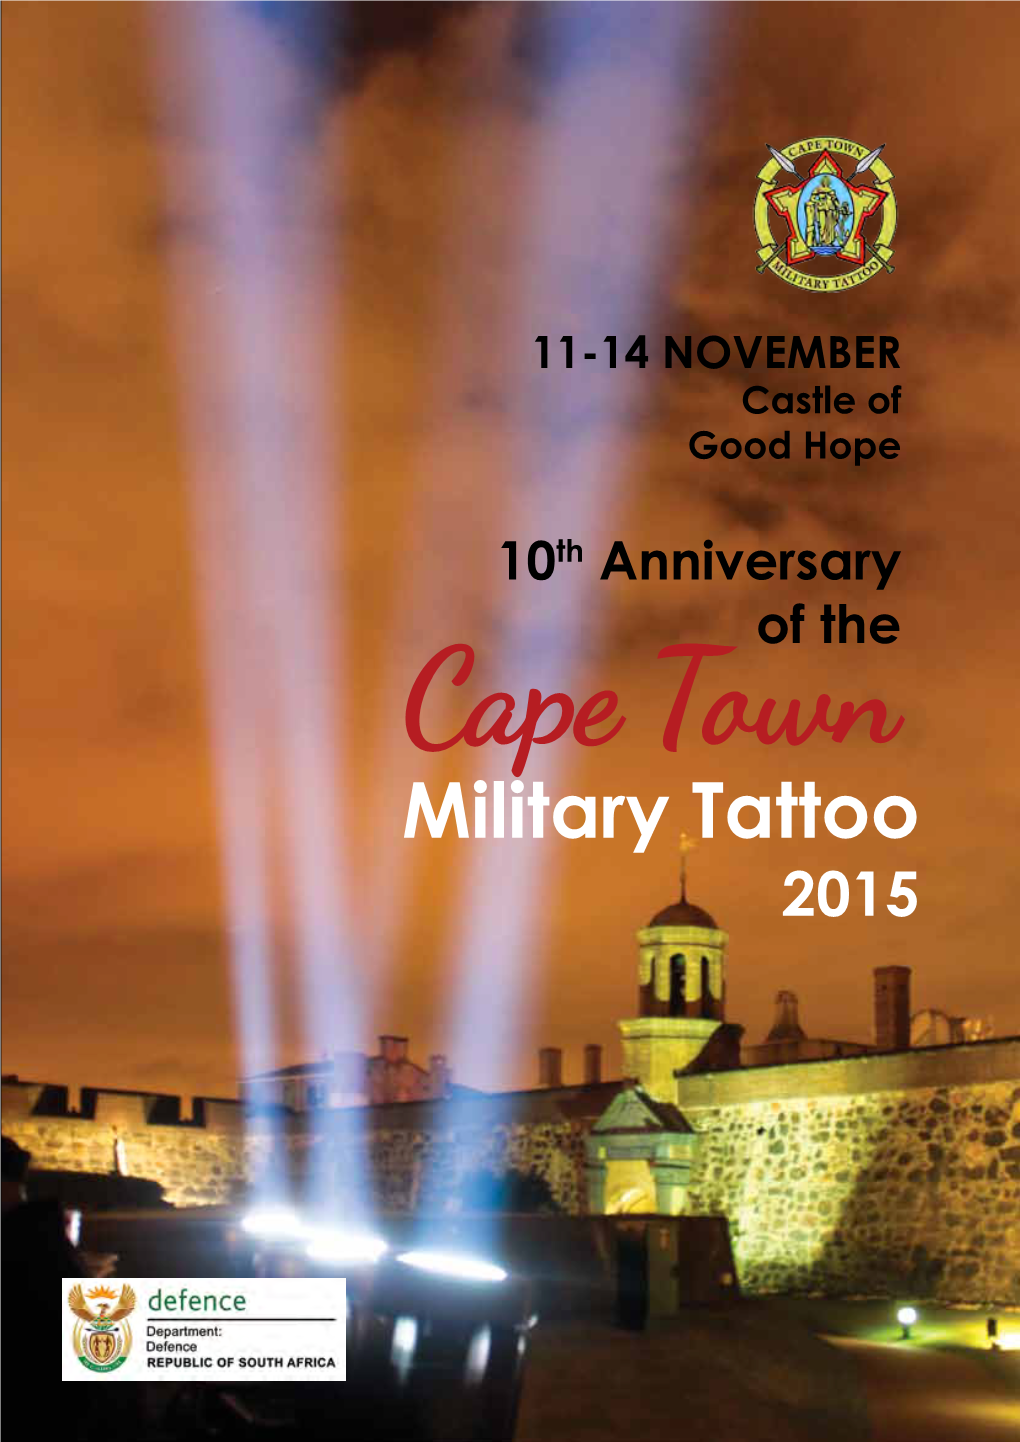 Memories of the Cape Town Military Tattoo